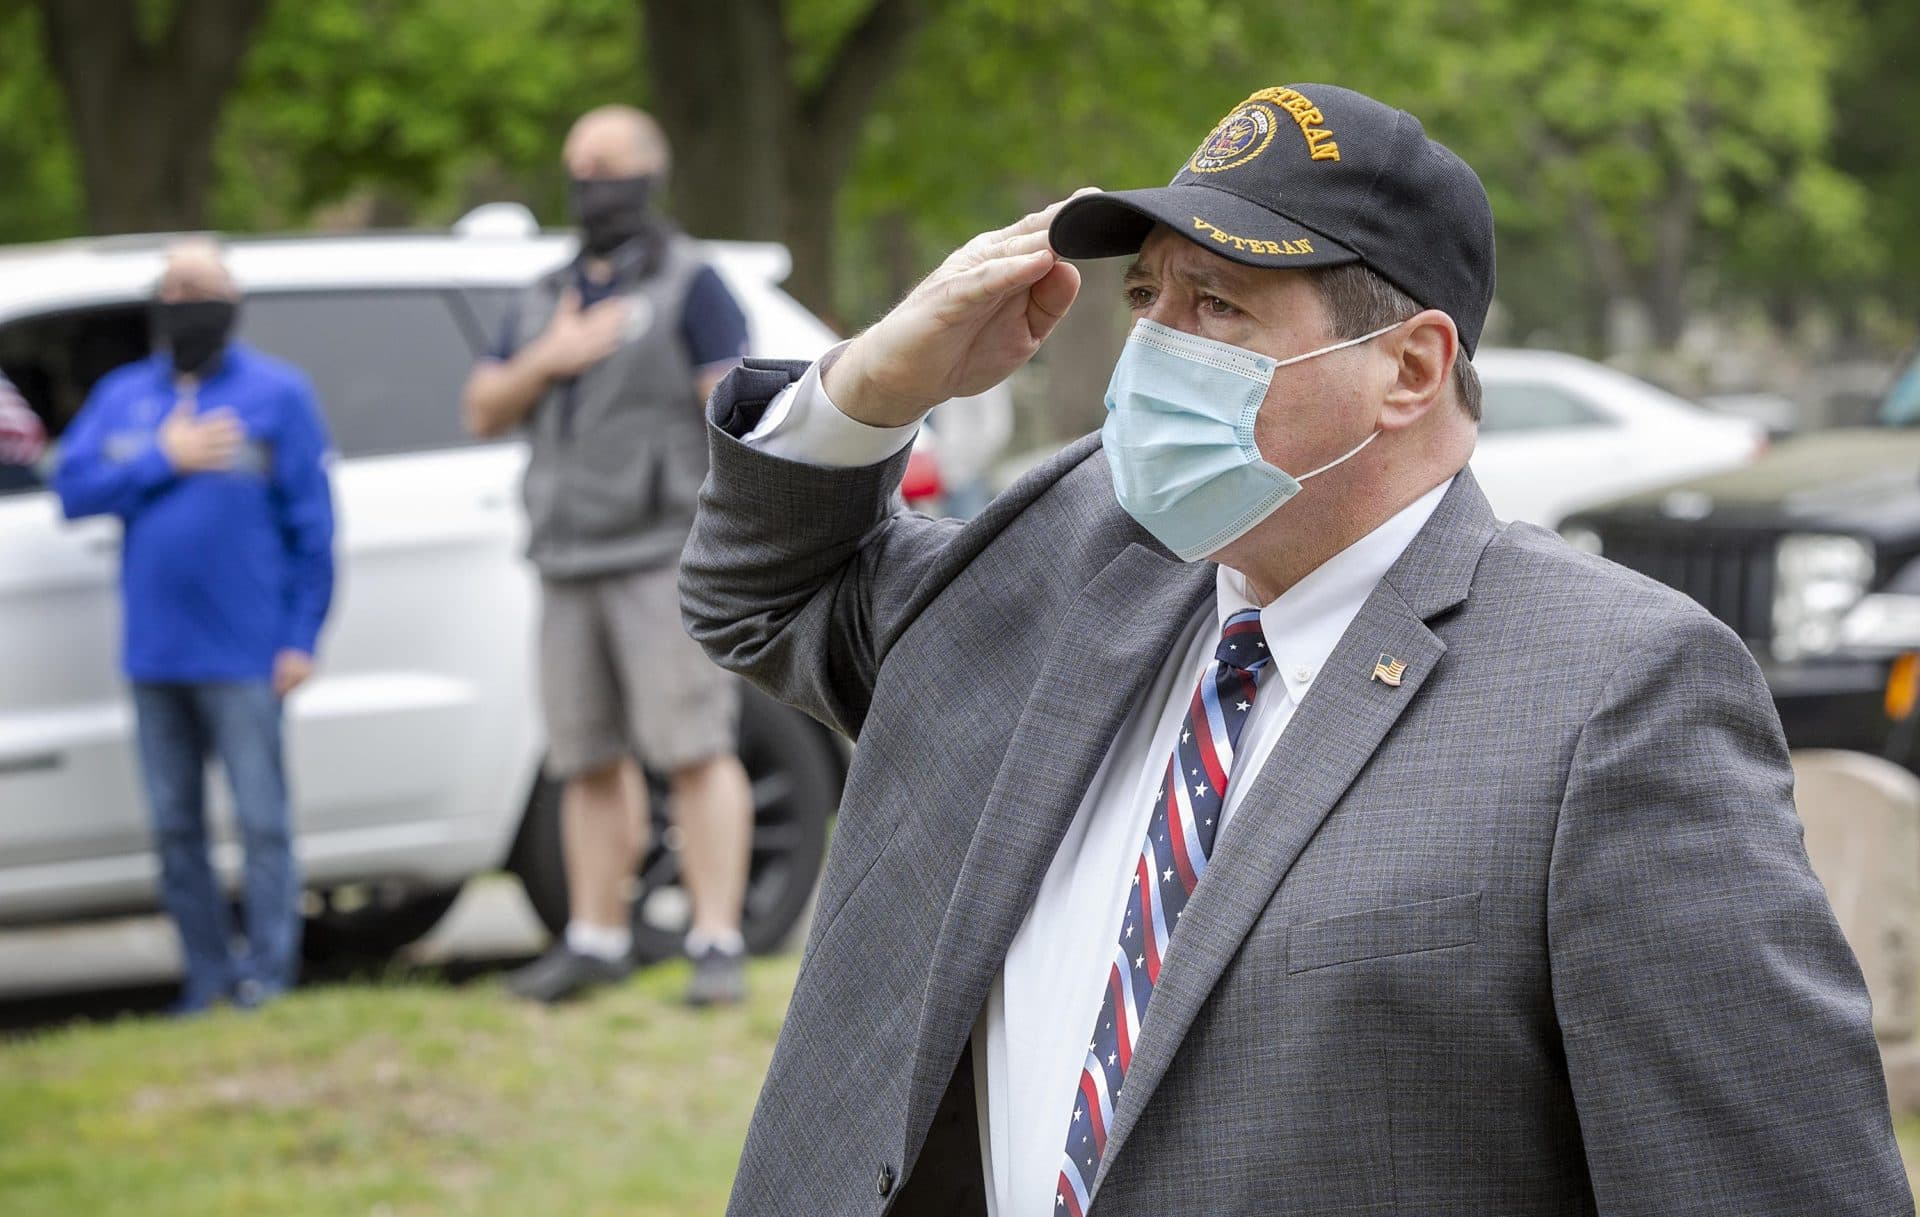 A man wearing a veteran hat salutes as the national anthem plays at a Memorial Day service in Glenwood Cemetery, Everett. (Robin Lubbock/WBUR)